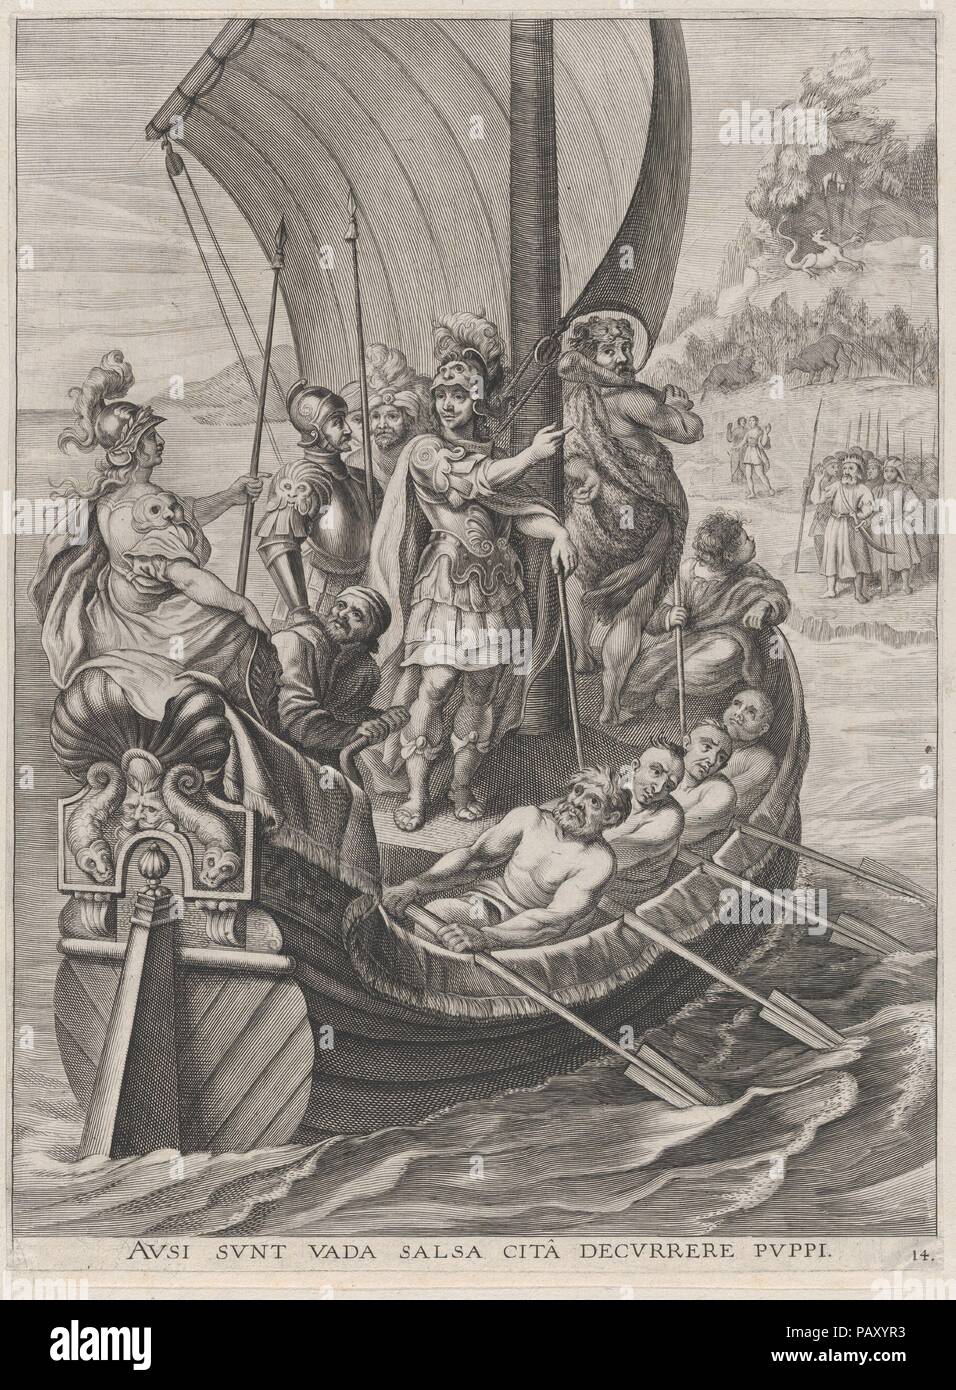 Plate 14: Ferdinand on a voyage with the Argonauts; from Guillielmus Becanus's 'Serenissimi Principis Ferdinandi, Hispaniarum Infantis...'. Artist: Jacobus van Schoor (Flemish, active Antwerp, 1633). Dimensions: Sheet (Trimmed): 14 13/16 × 10 7/8 in. (37.7 × 27.7 cm). Published in: Antwerp. Publisher: Johannes Meursius (Flemish, active 1620-47). Date: 1636.  On January 28, 1635, the city of Ghent celebrated the entry of Cardinal-Infante Ferdinand of Spain, the recently appointed governor of the Southern Netherlands. A group of Flemish artists were commissioned to create paintings for the decor Stock Photo